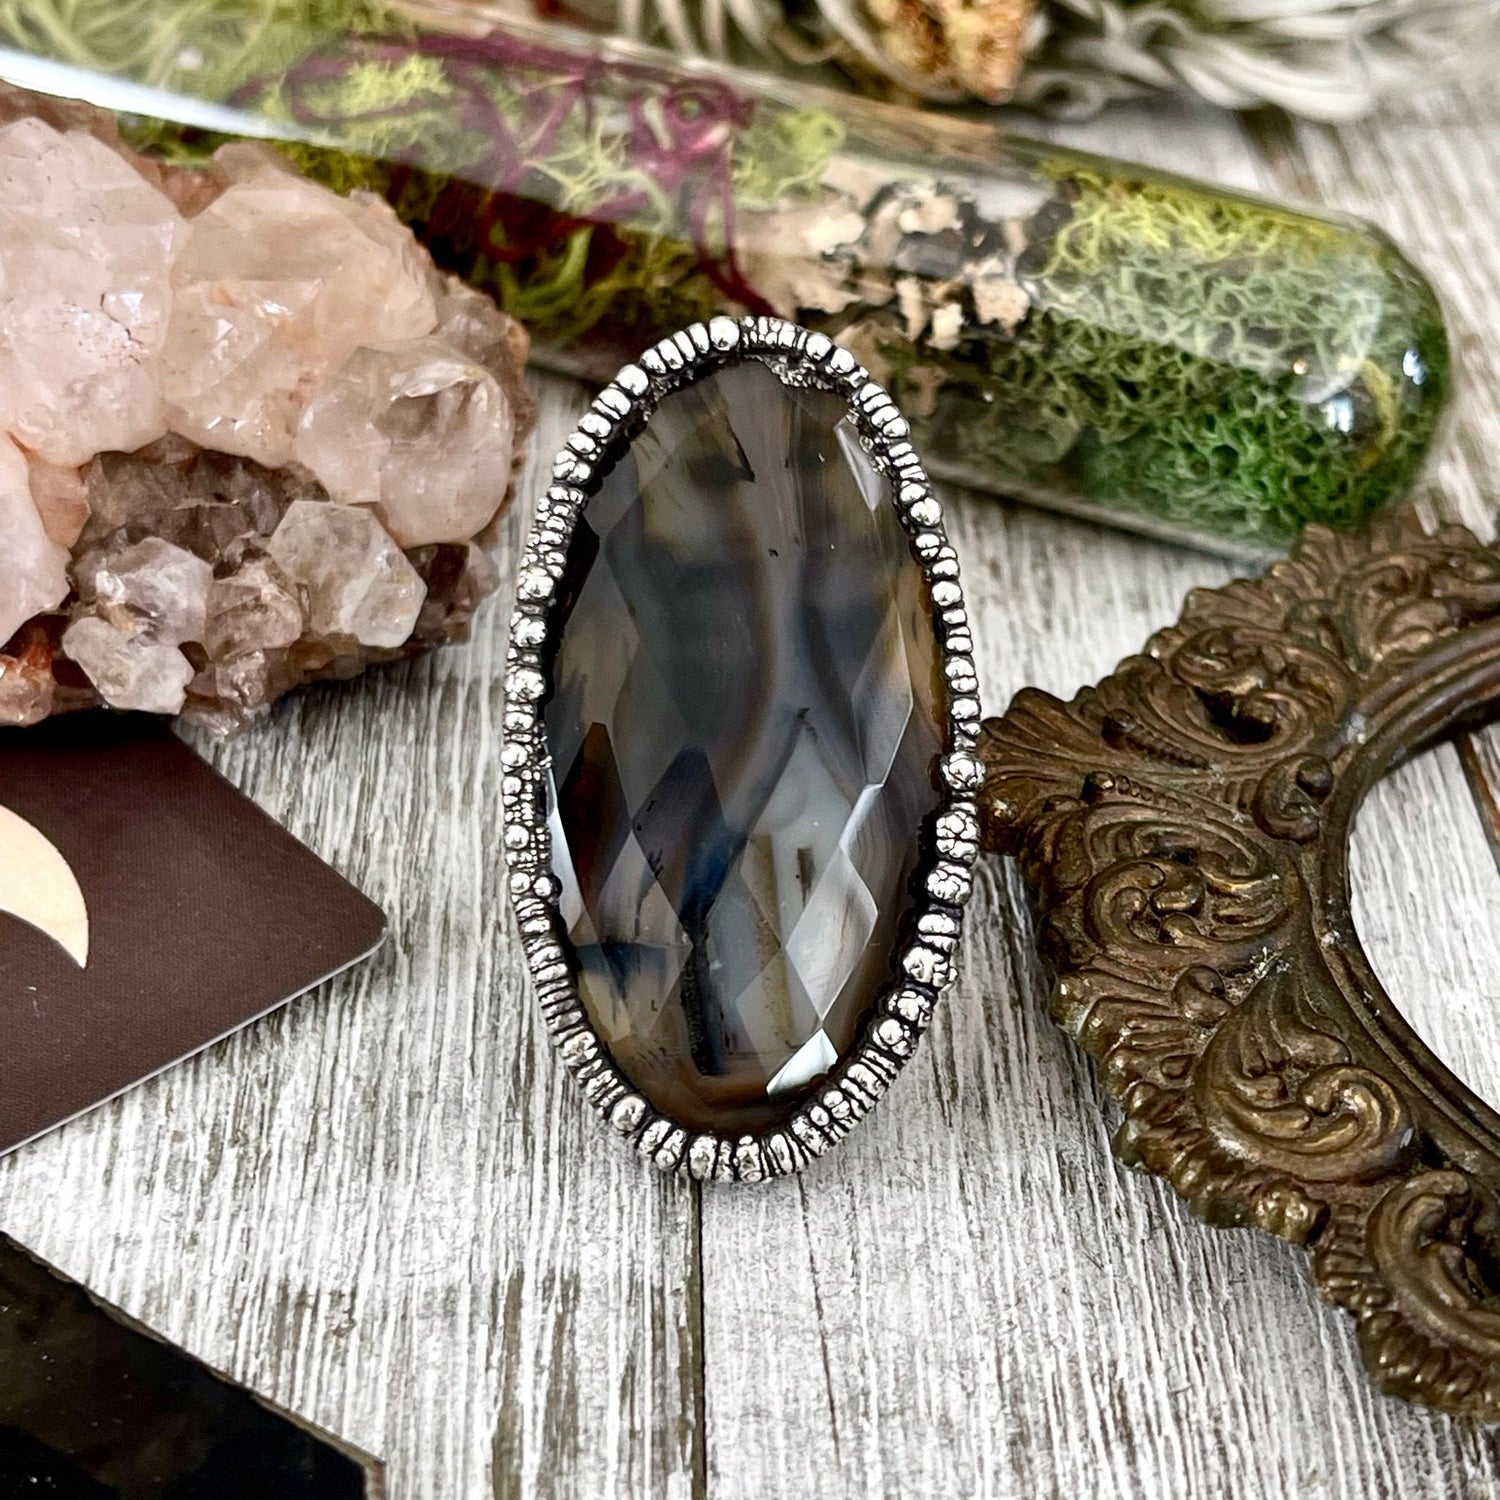 Size 8 Silver Montana Moss Agate Statement Ring / Large Crystal Bohemian Dendritic Agate Ring